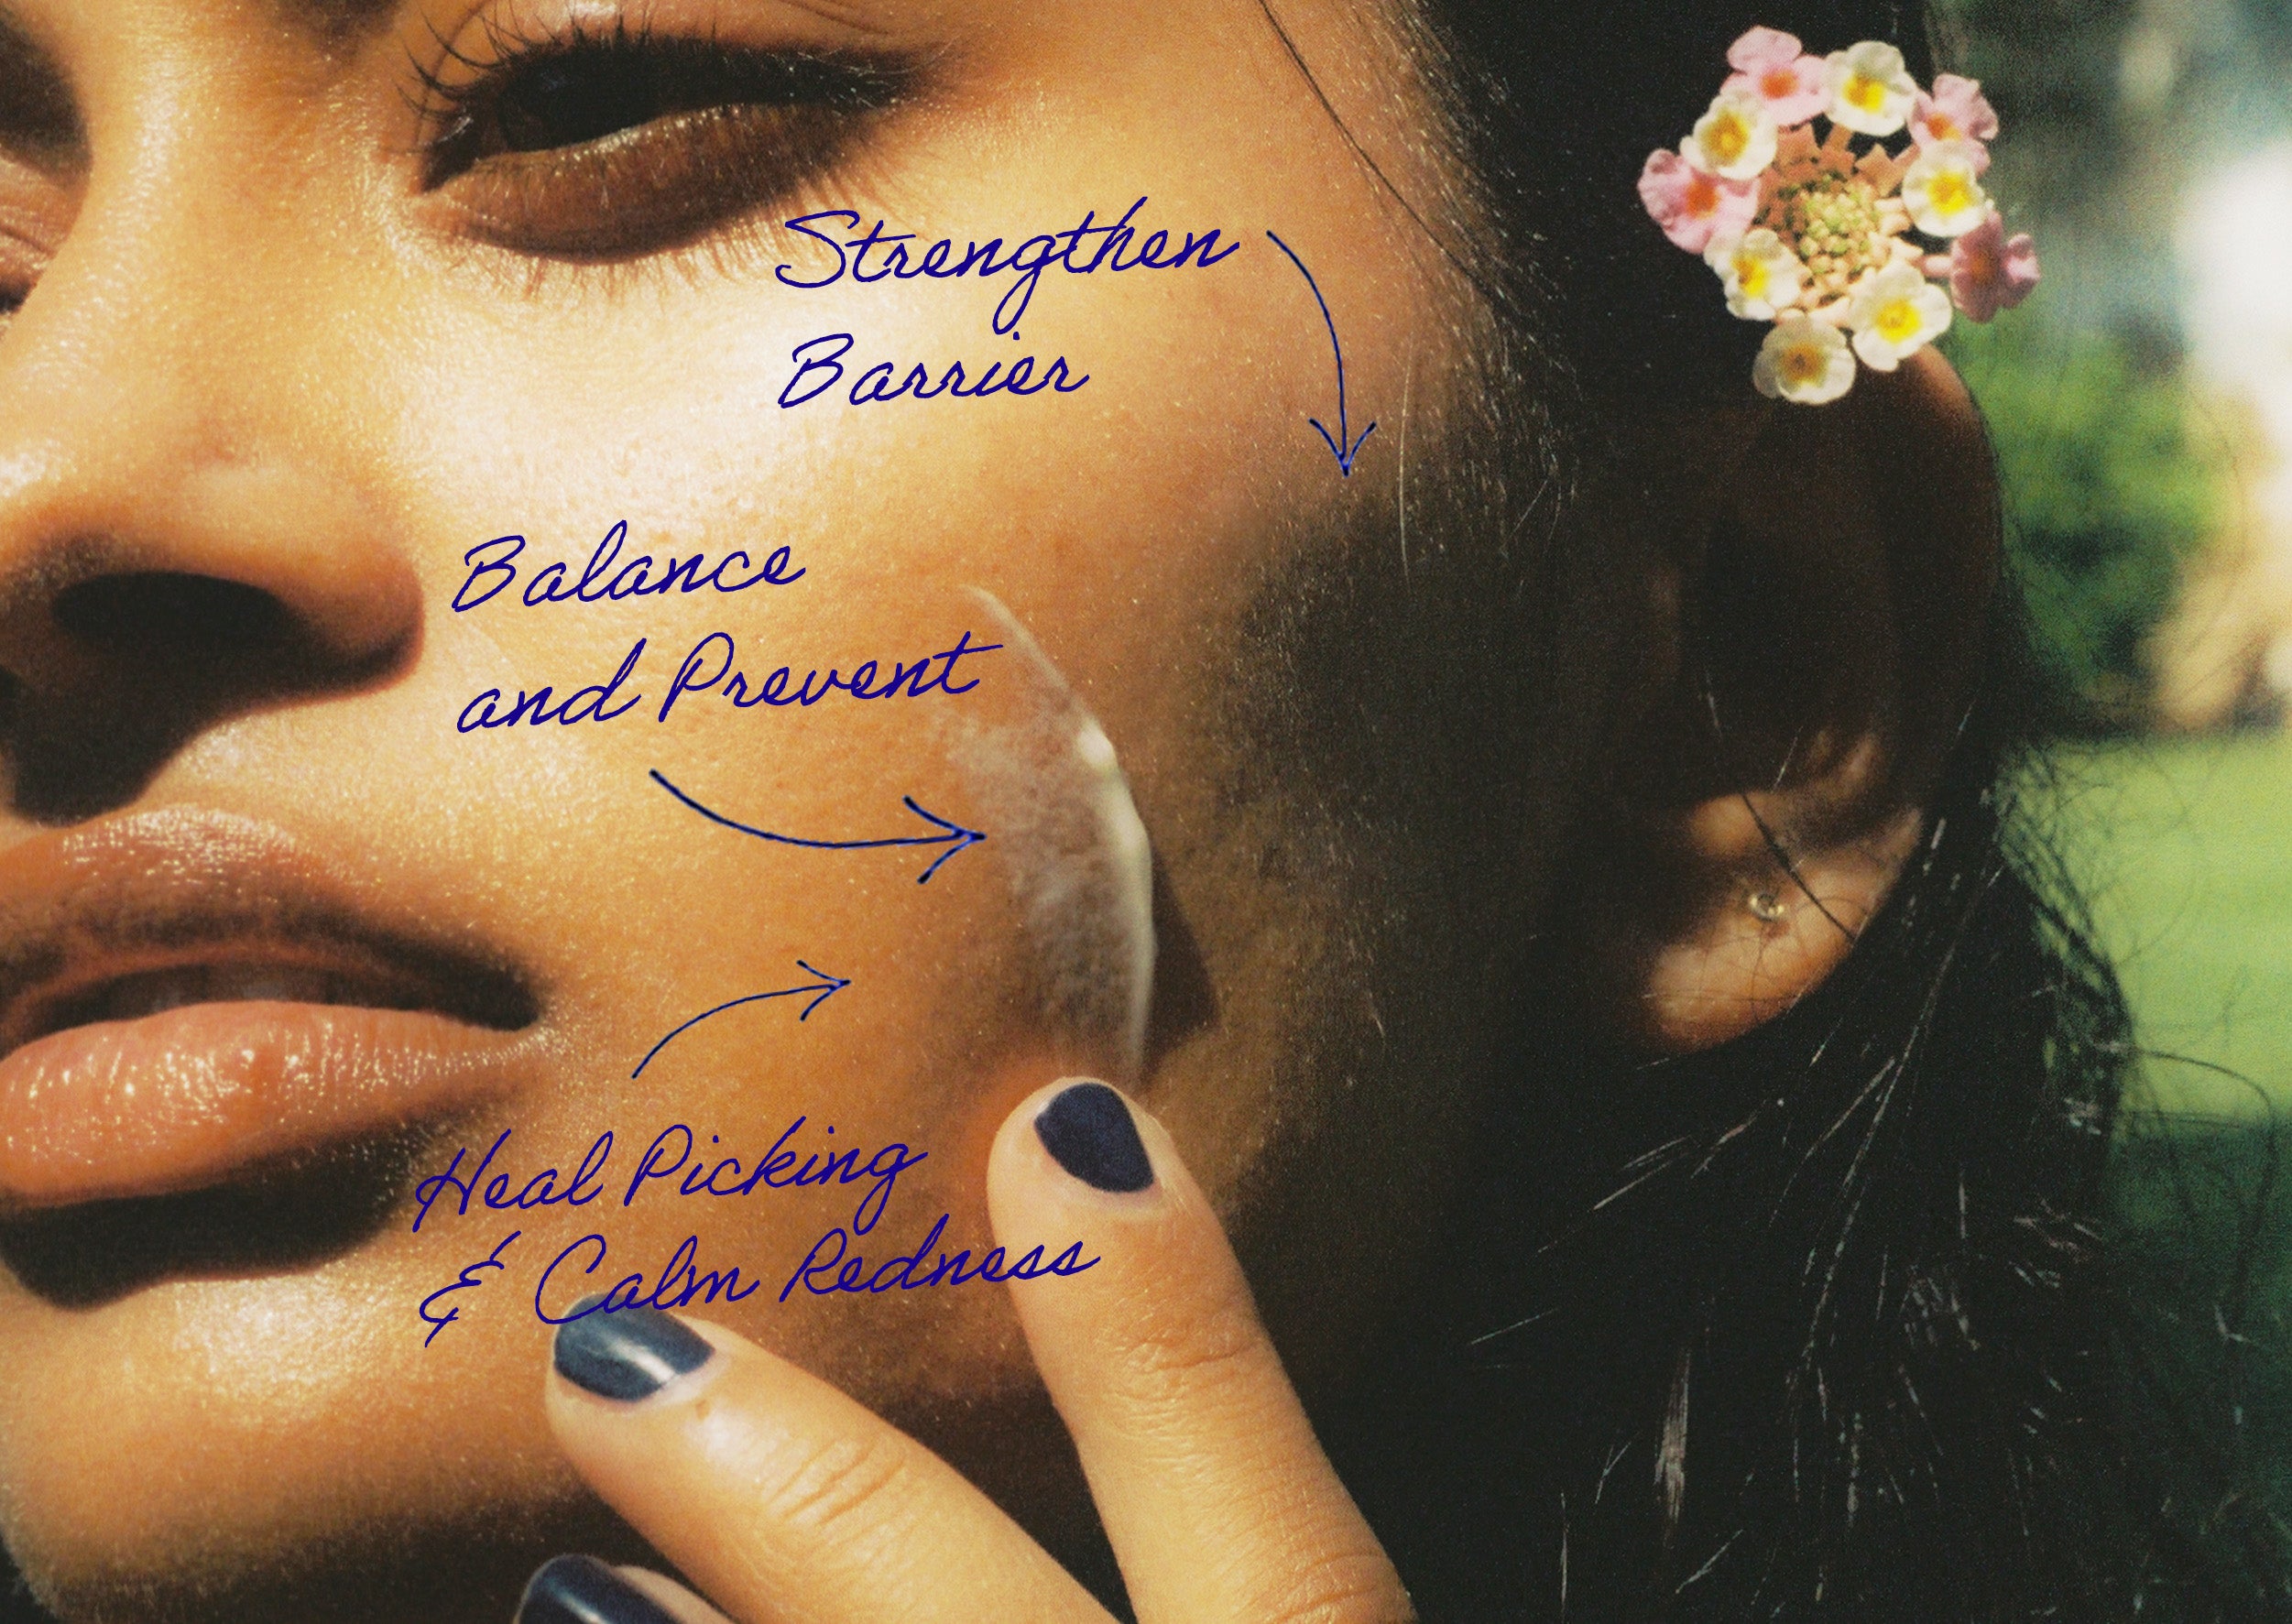 Close-up of a woman's face with annotated skincare notes and a flower in her hair.